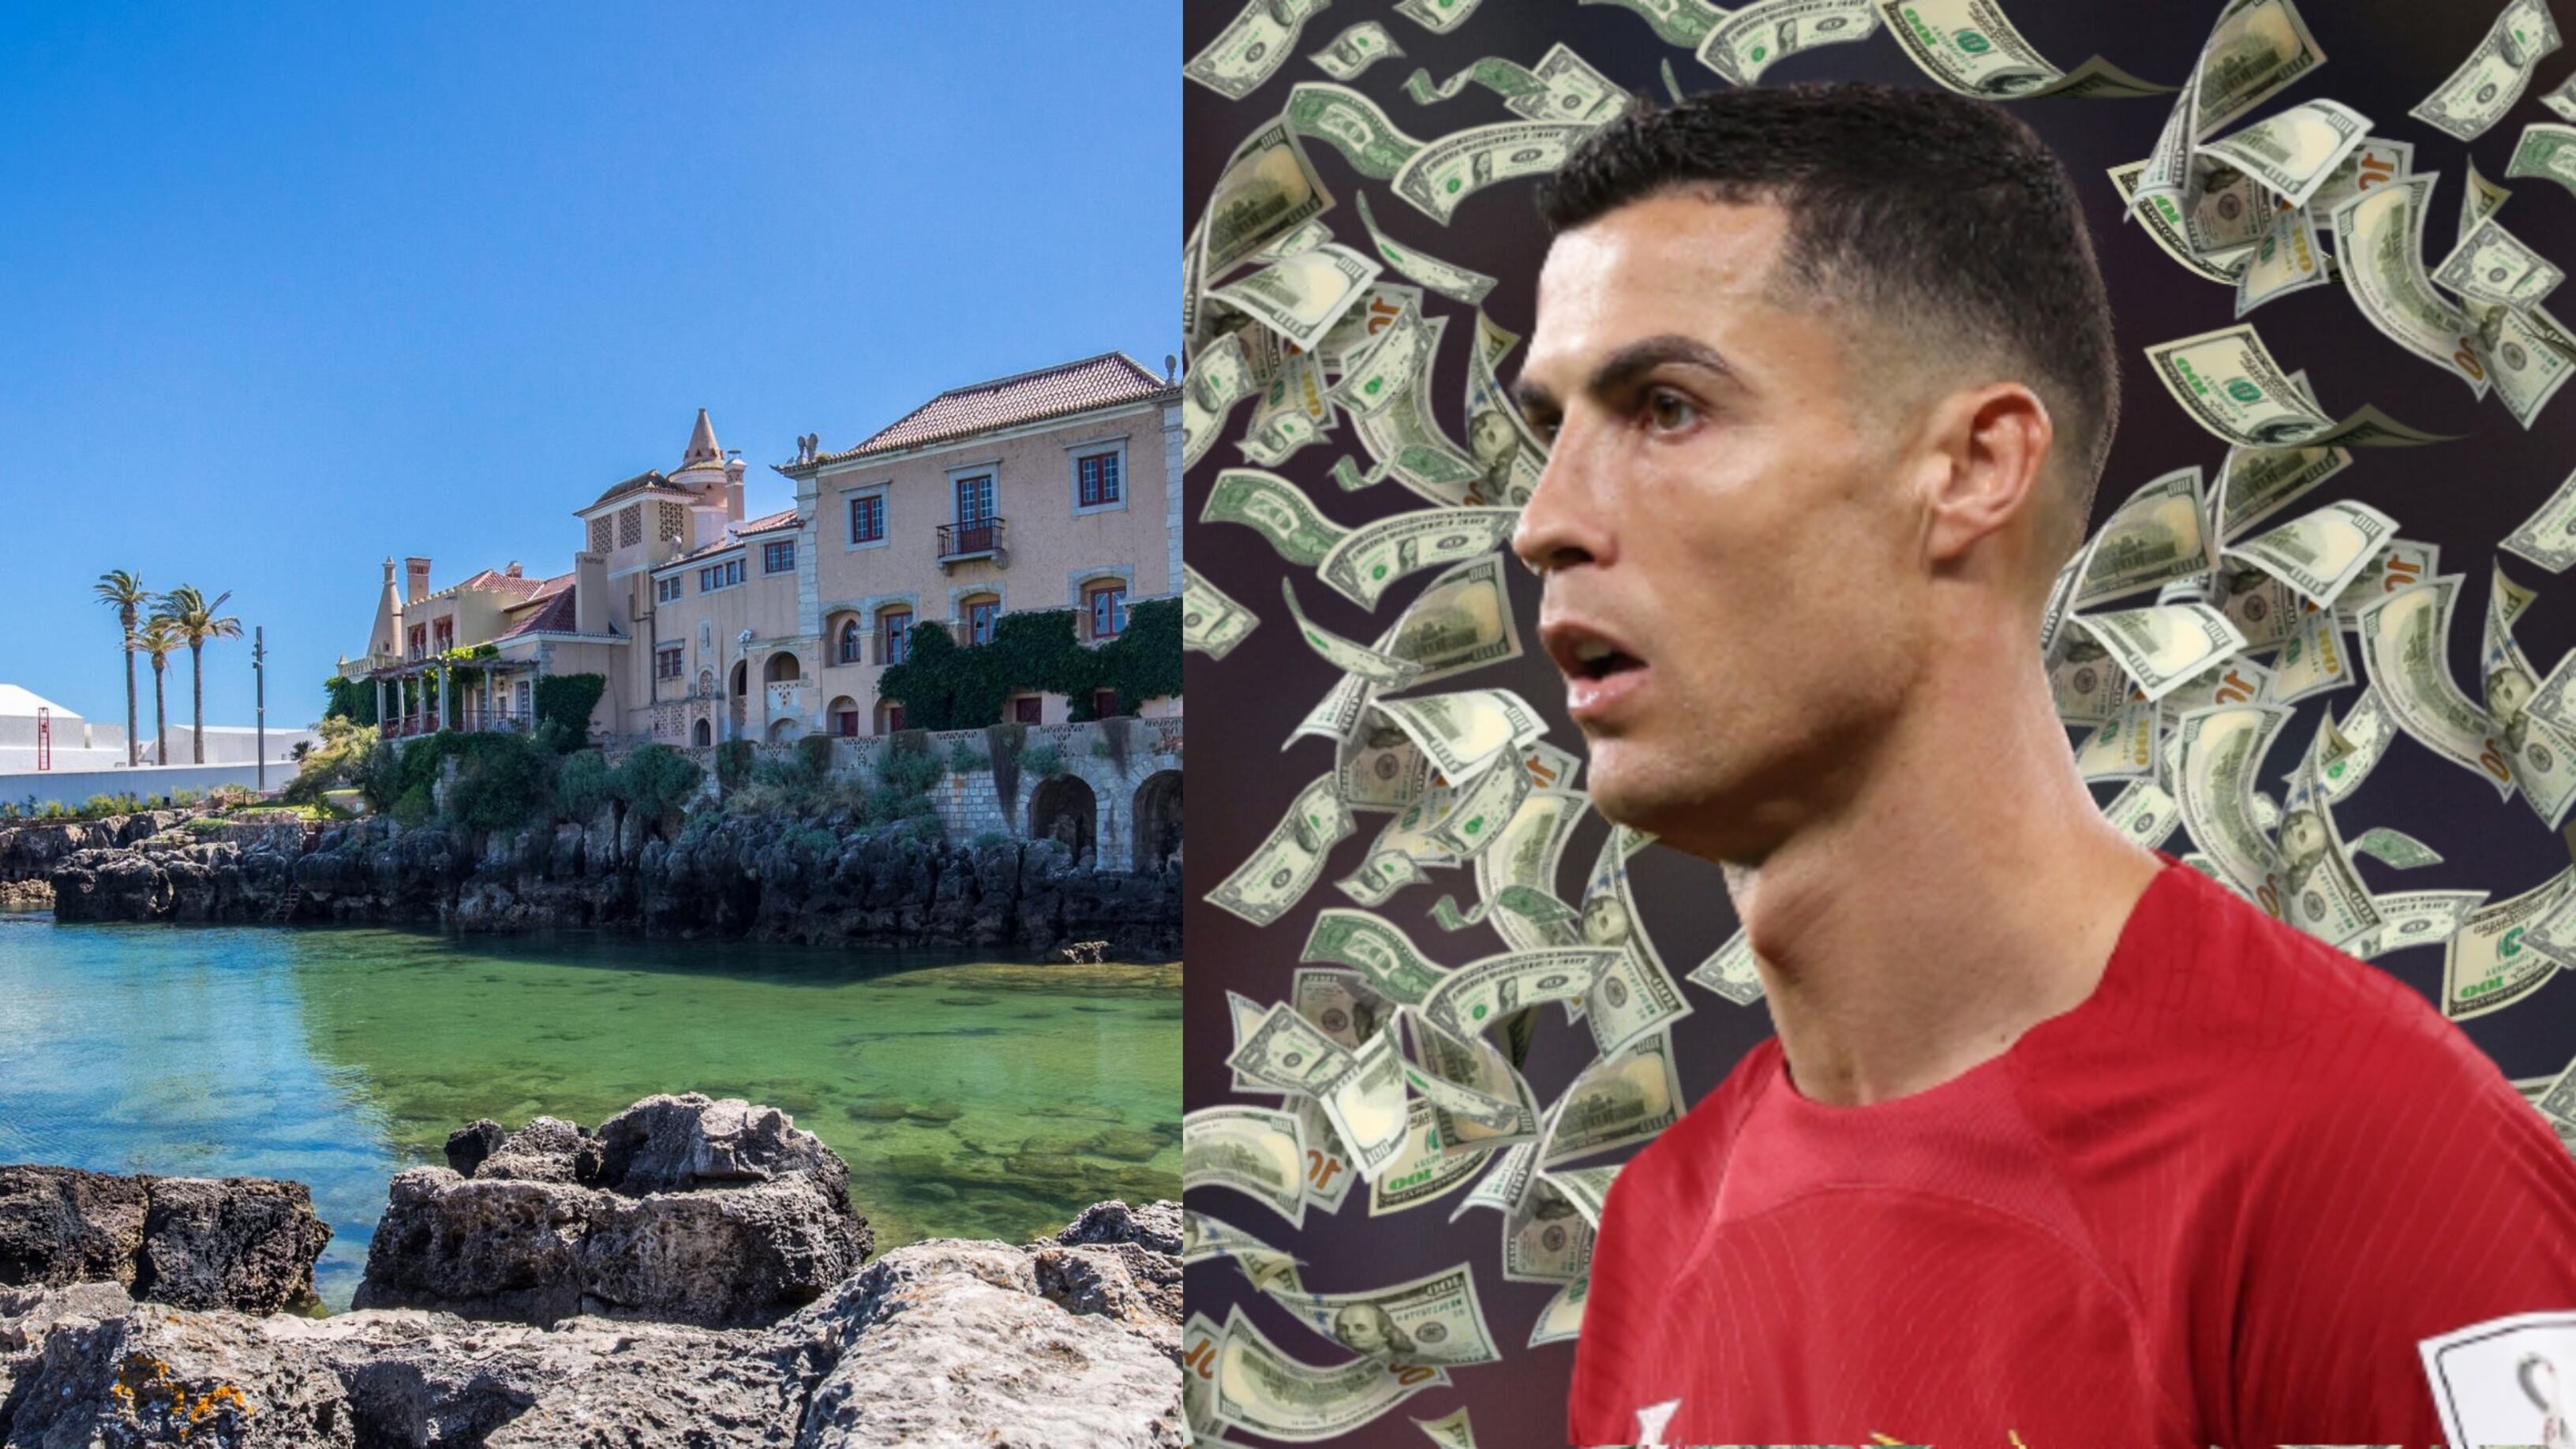 The $22 million mansion where Cristiano Ronaldo will live after his retirement